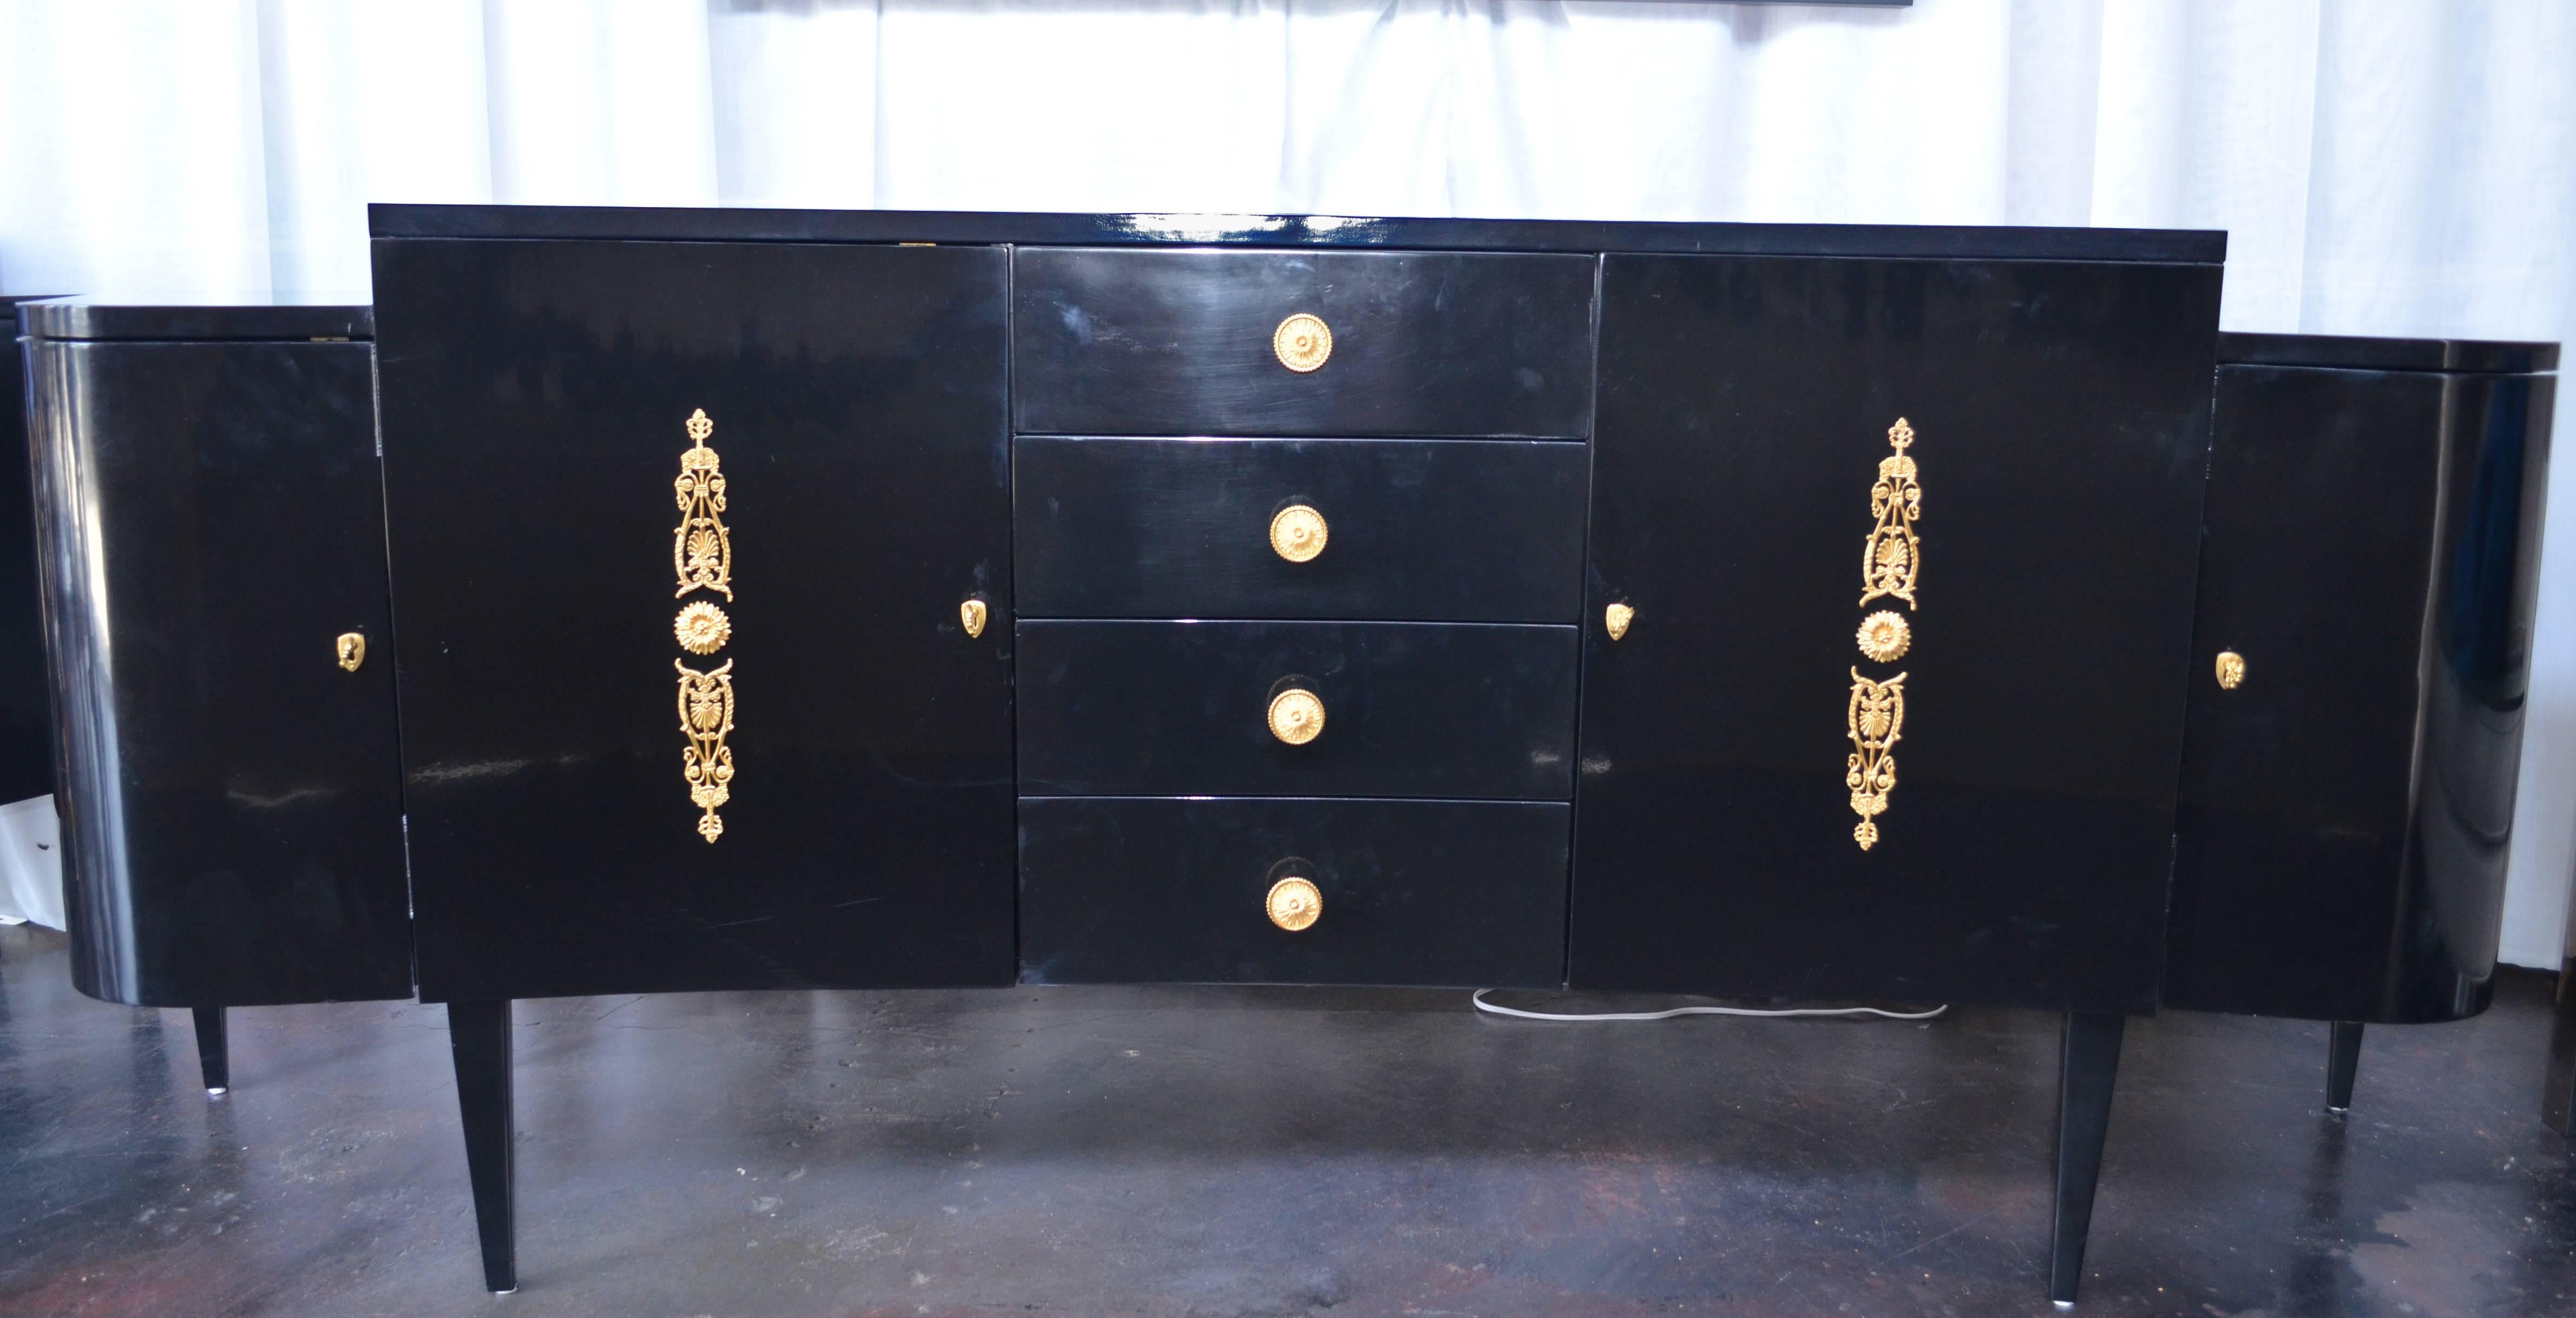 Pair of black lacquer commodes by Kelly Wearstler. The commodes have four front drawers with detailed gold finished bronze knobs. As well as four shelved cabinets with gold accents.